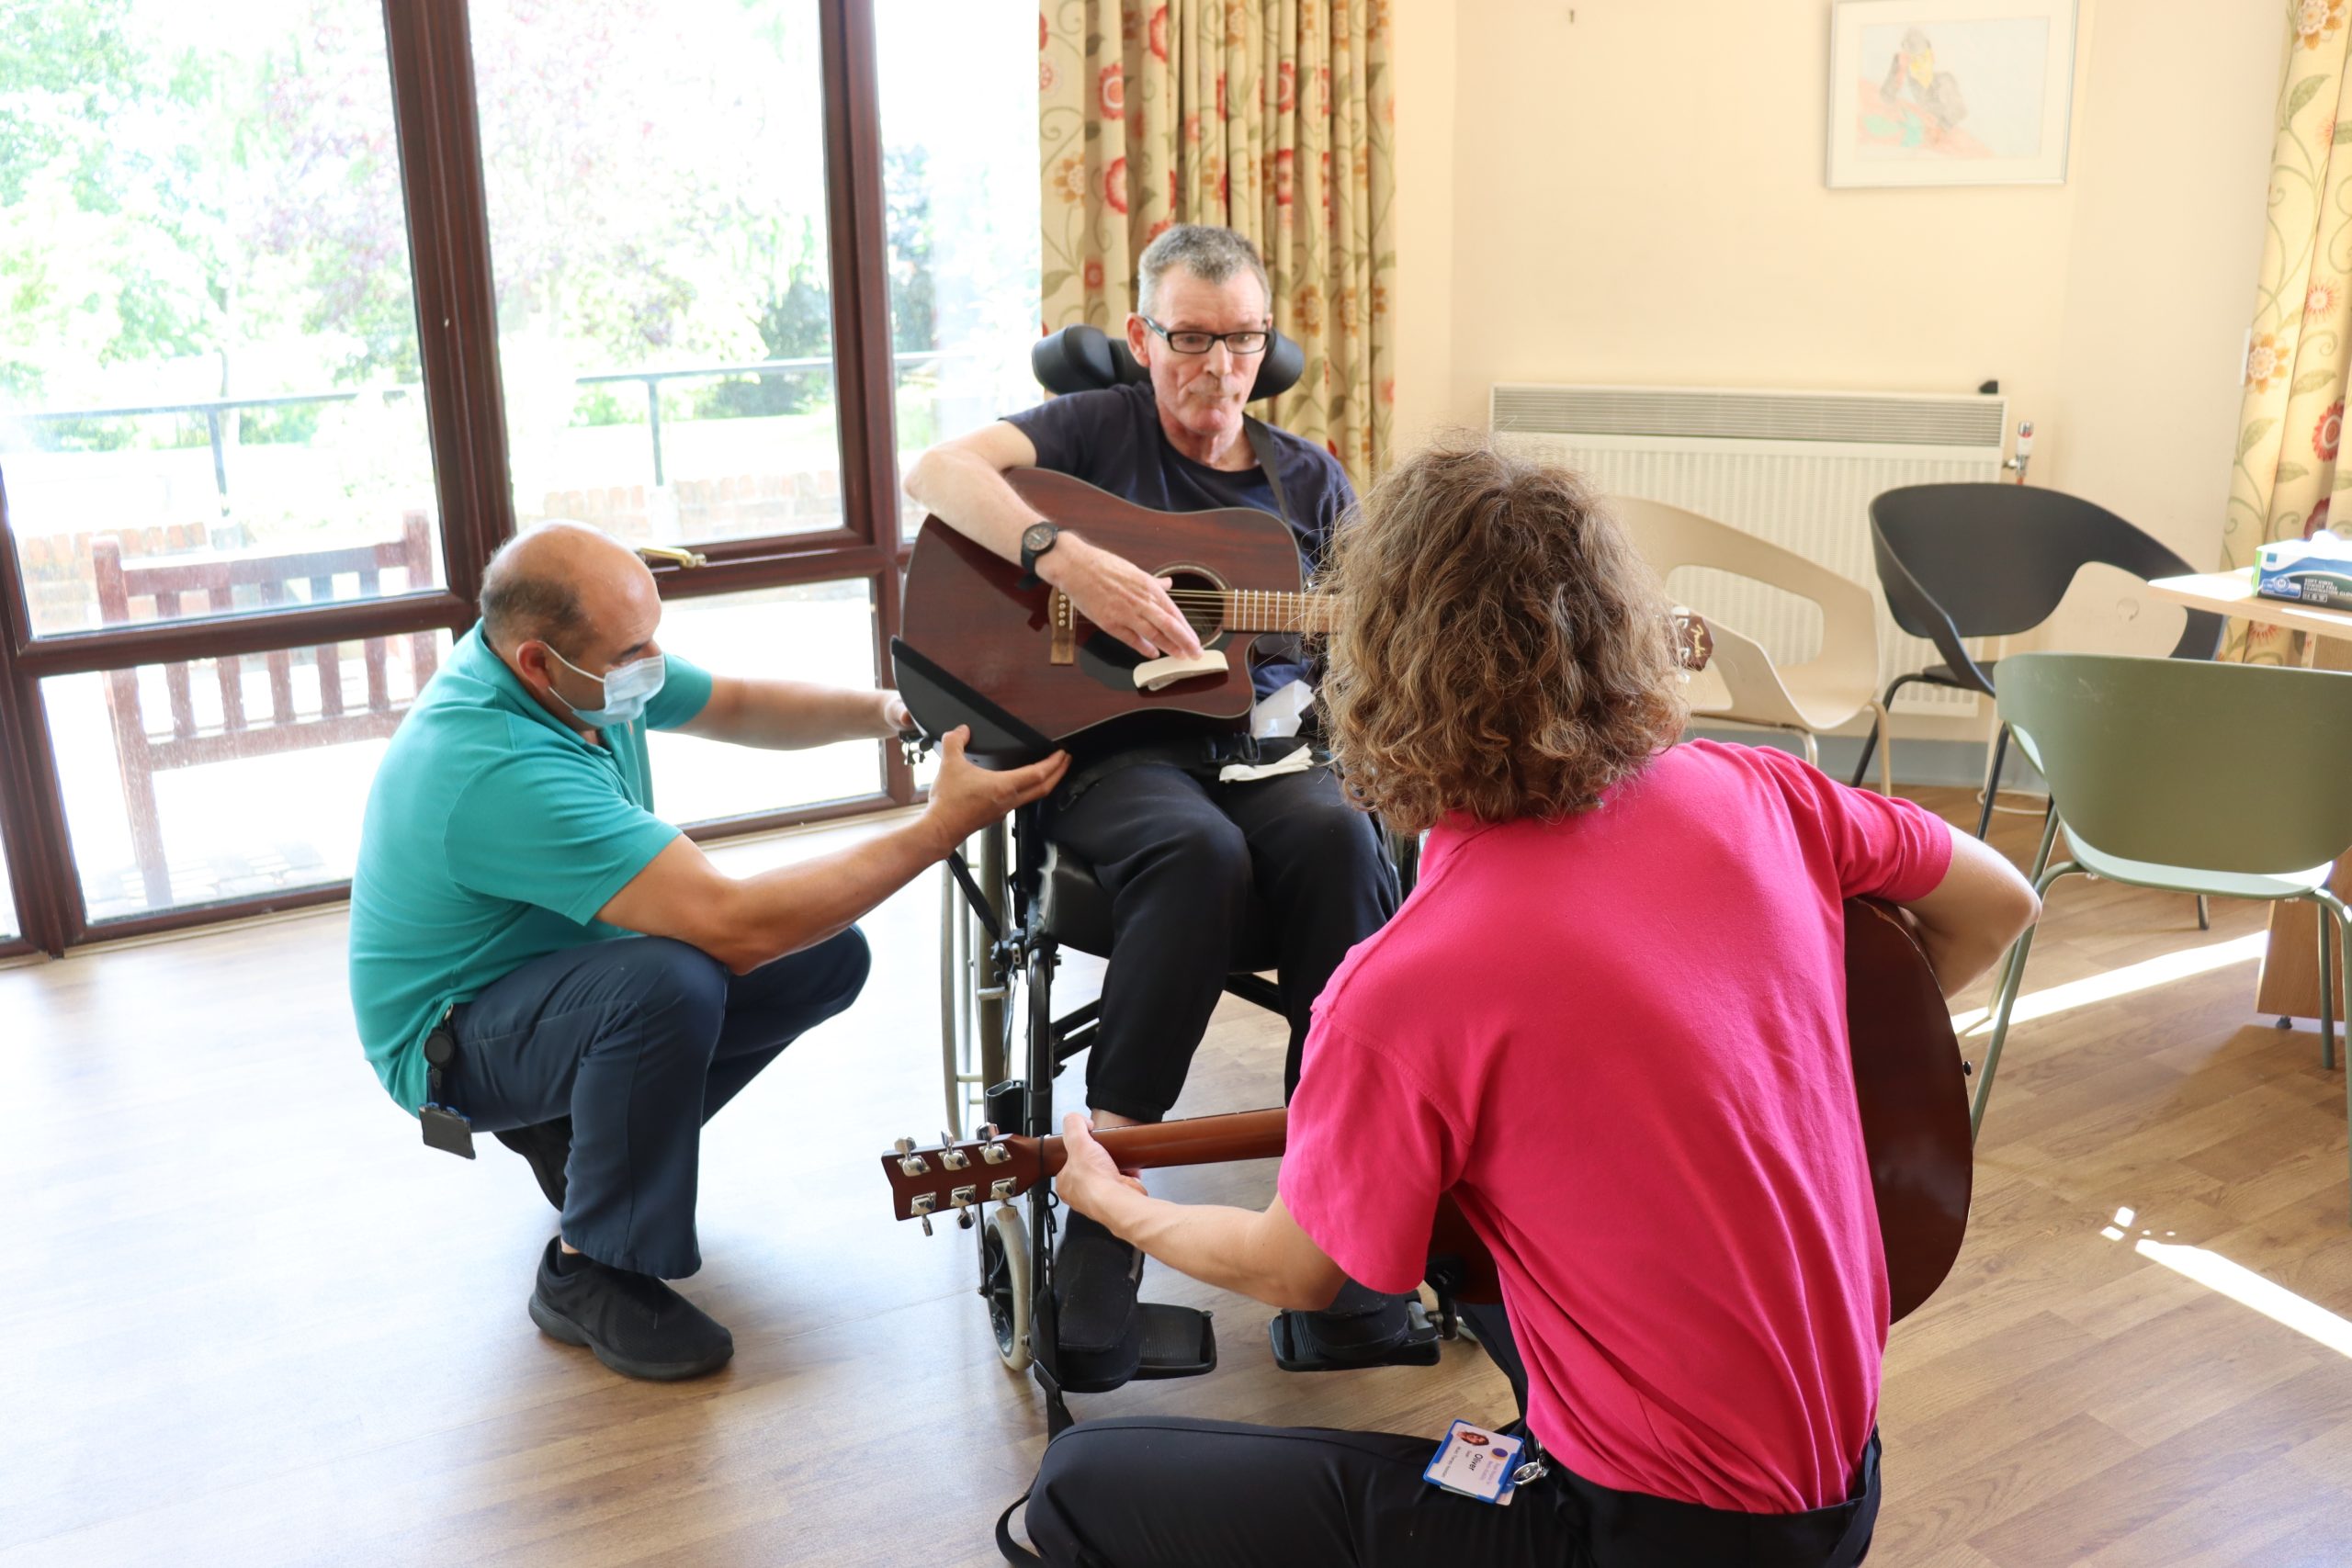 RHN XMAS APPEAL - Music therapy assistant Oli and Alberto with Nick